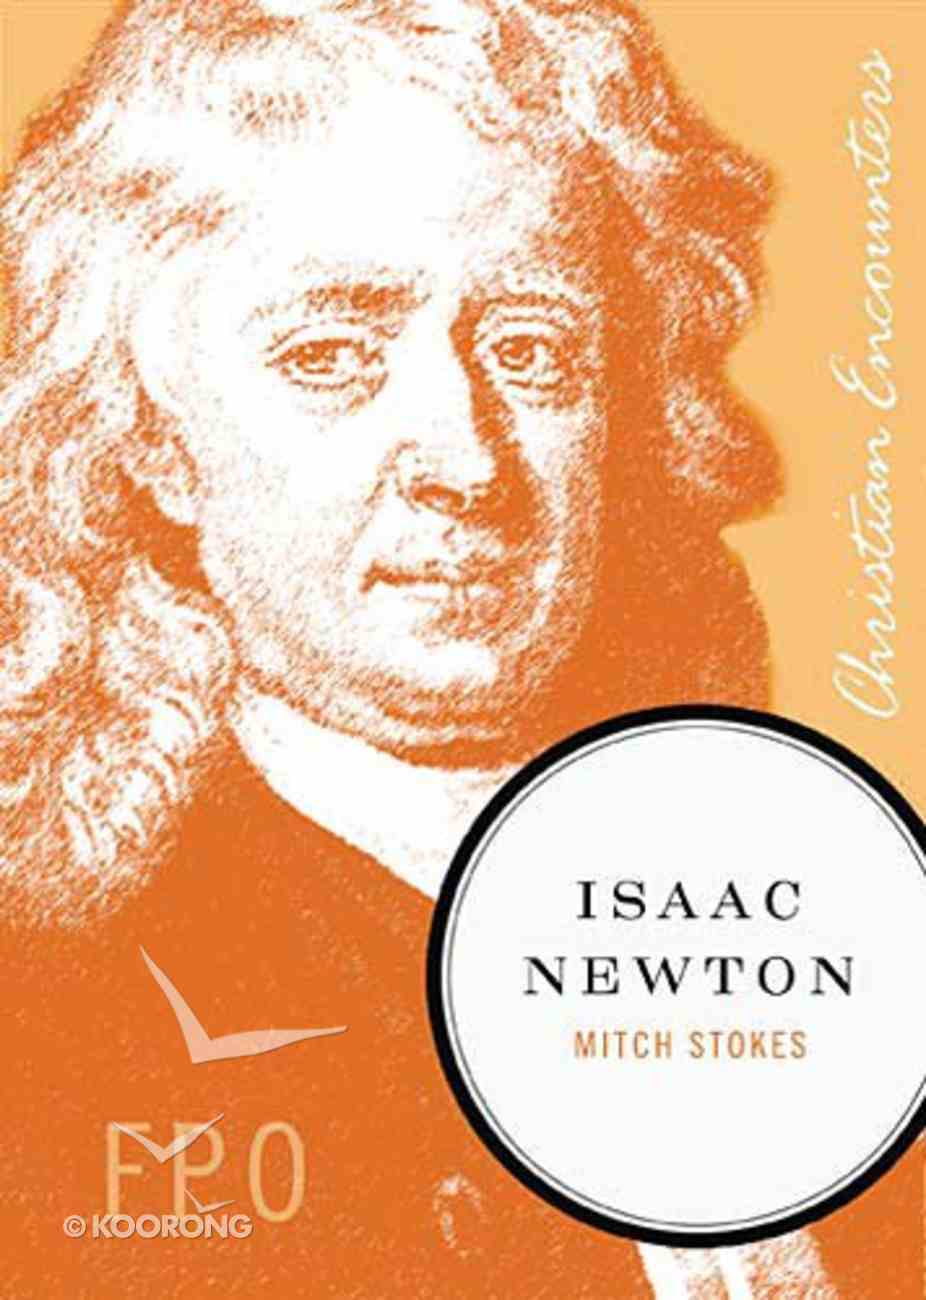 Isaac Newton Christian Encounters Series By Mitch Stokes Koorong